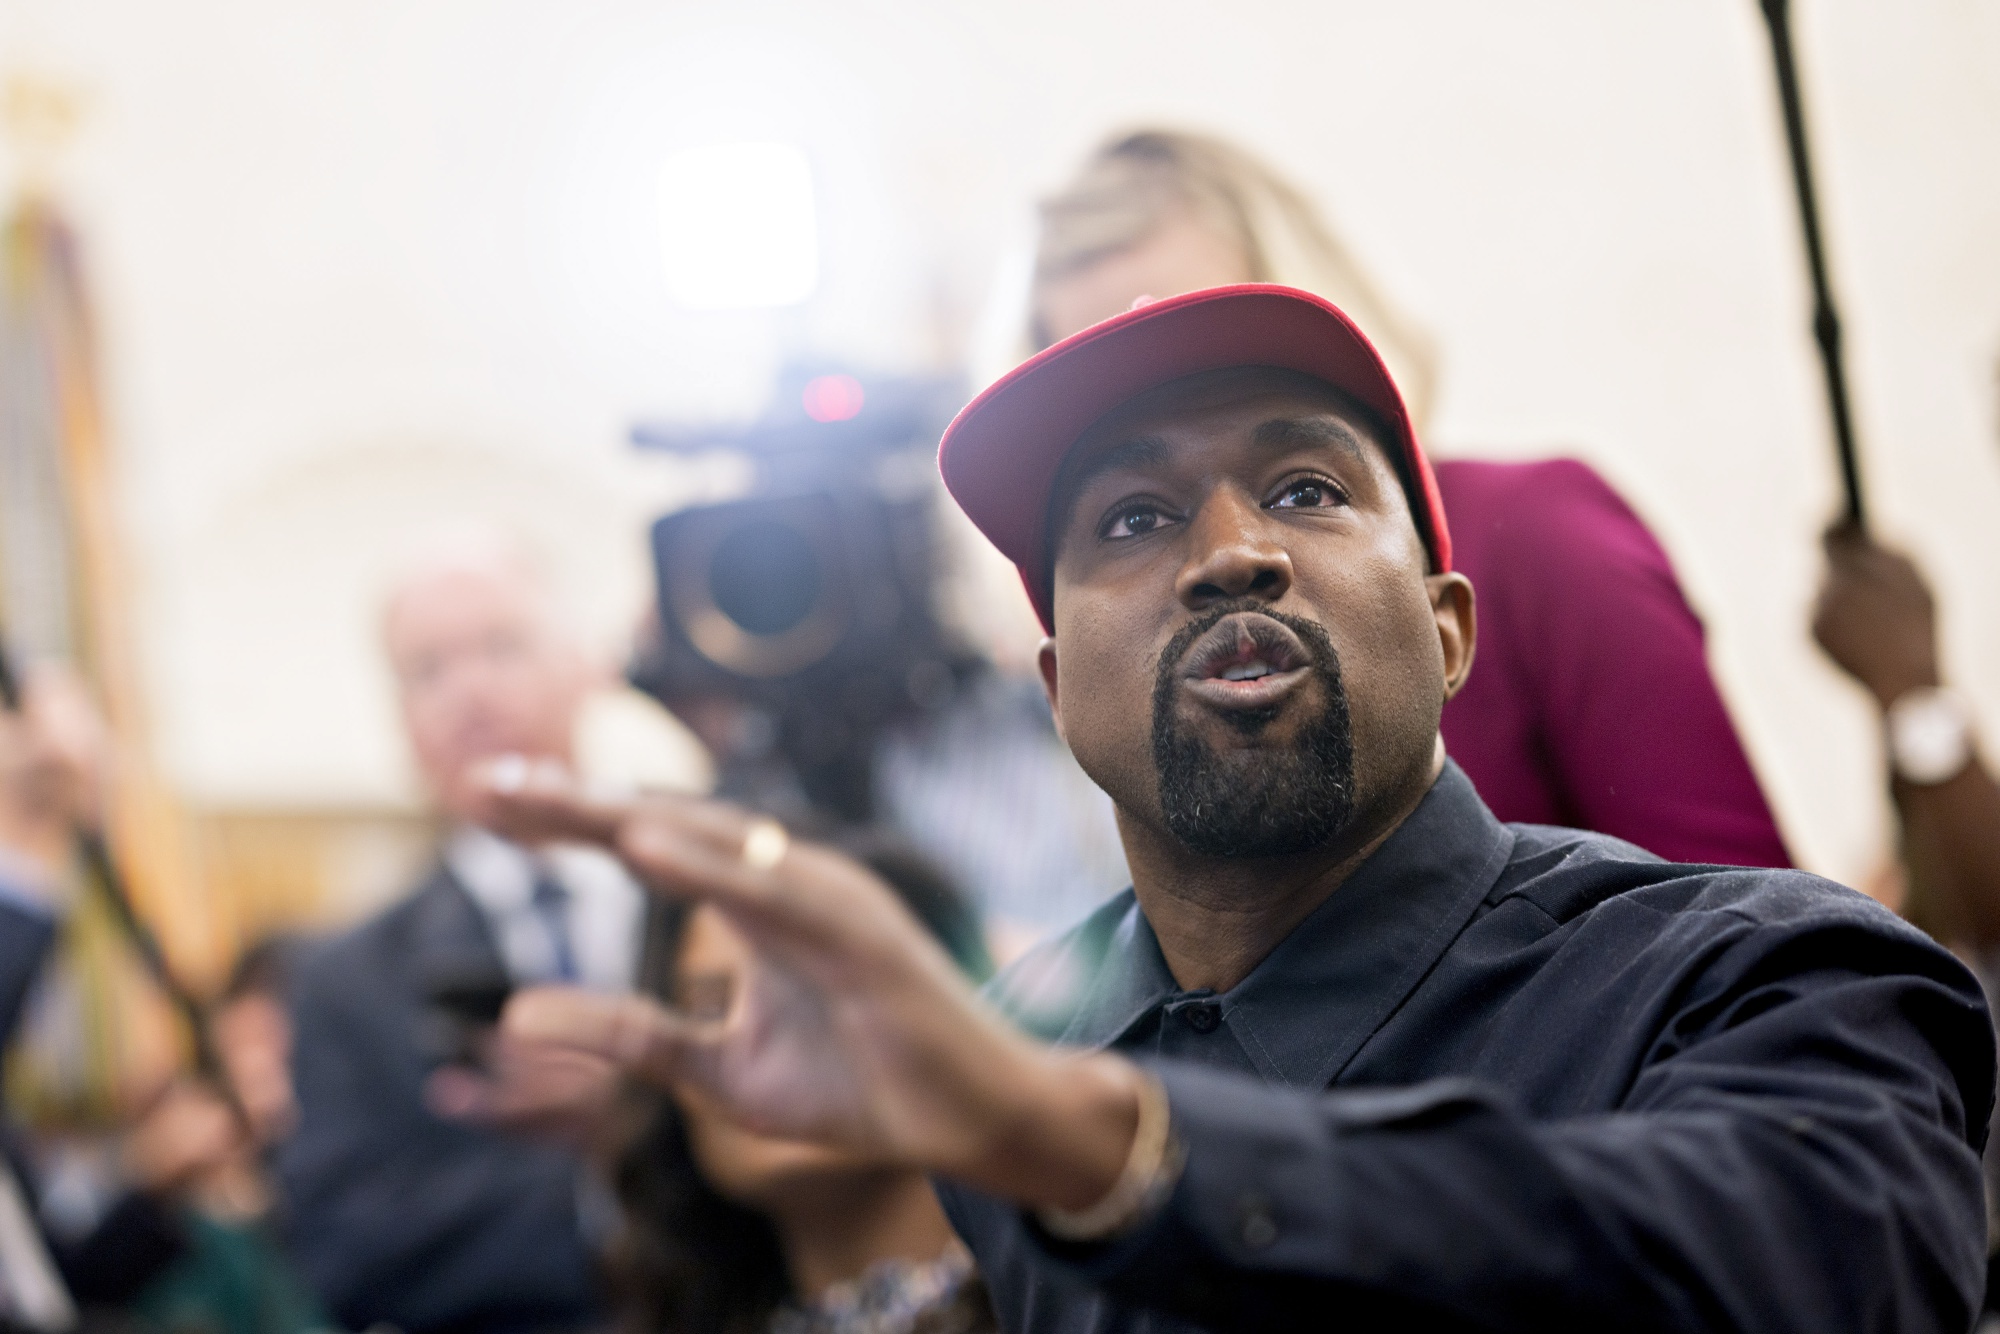 Documentary Uncovers The Rift Between Frenemies Kanye West And